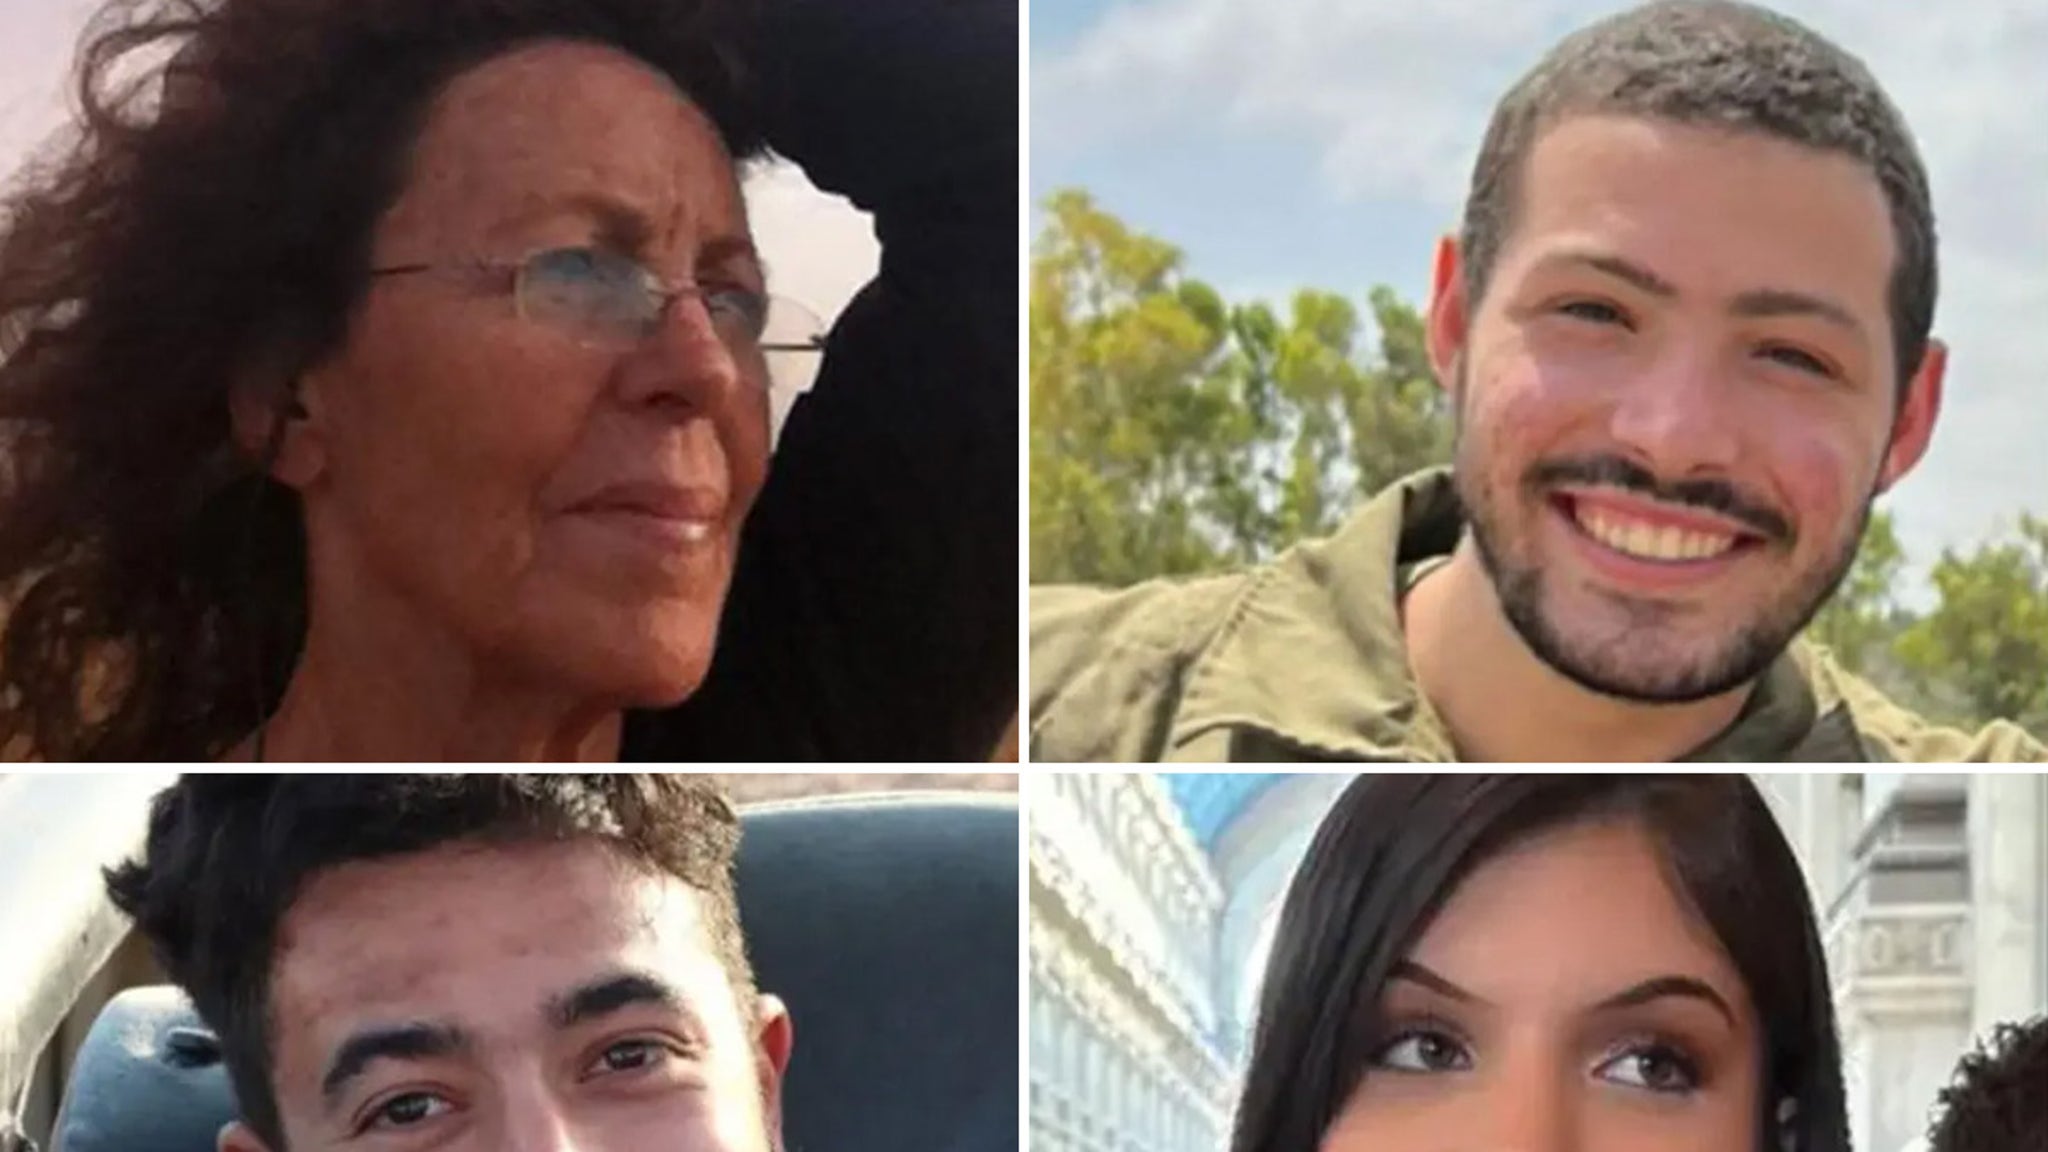 Americans Missing in Israel After Hamas Attacks